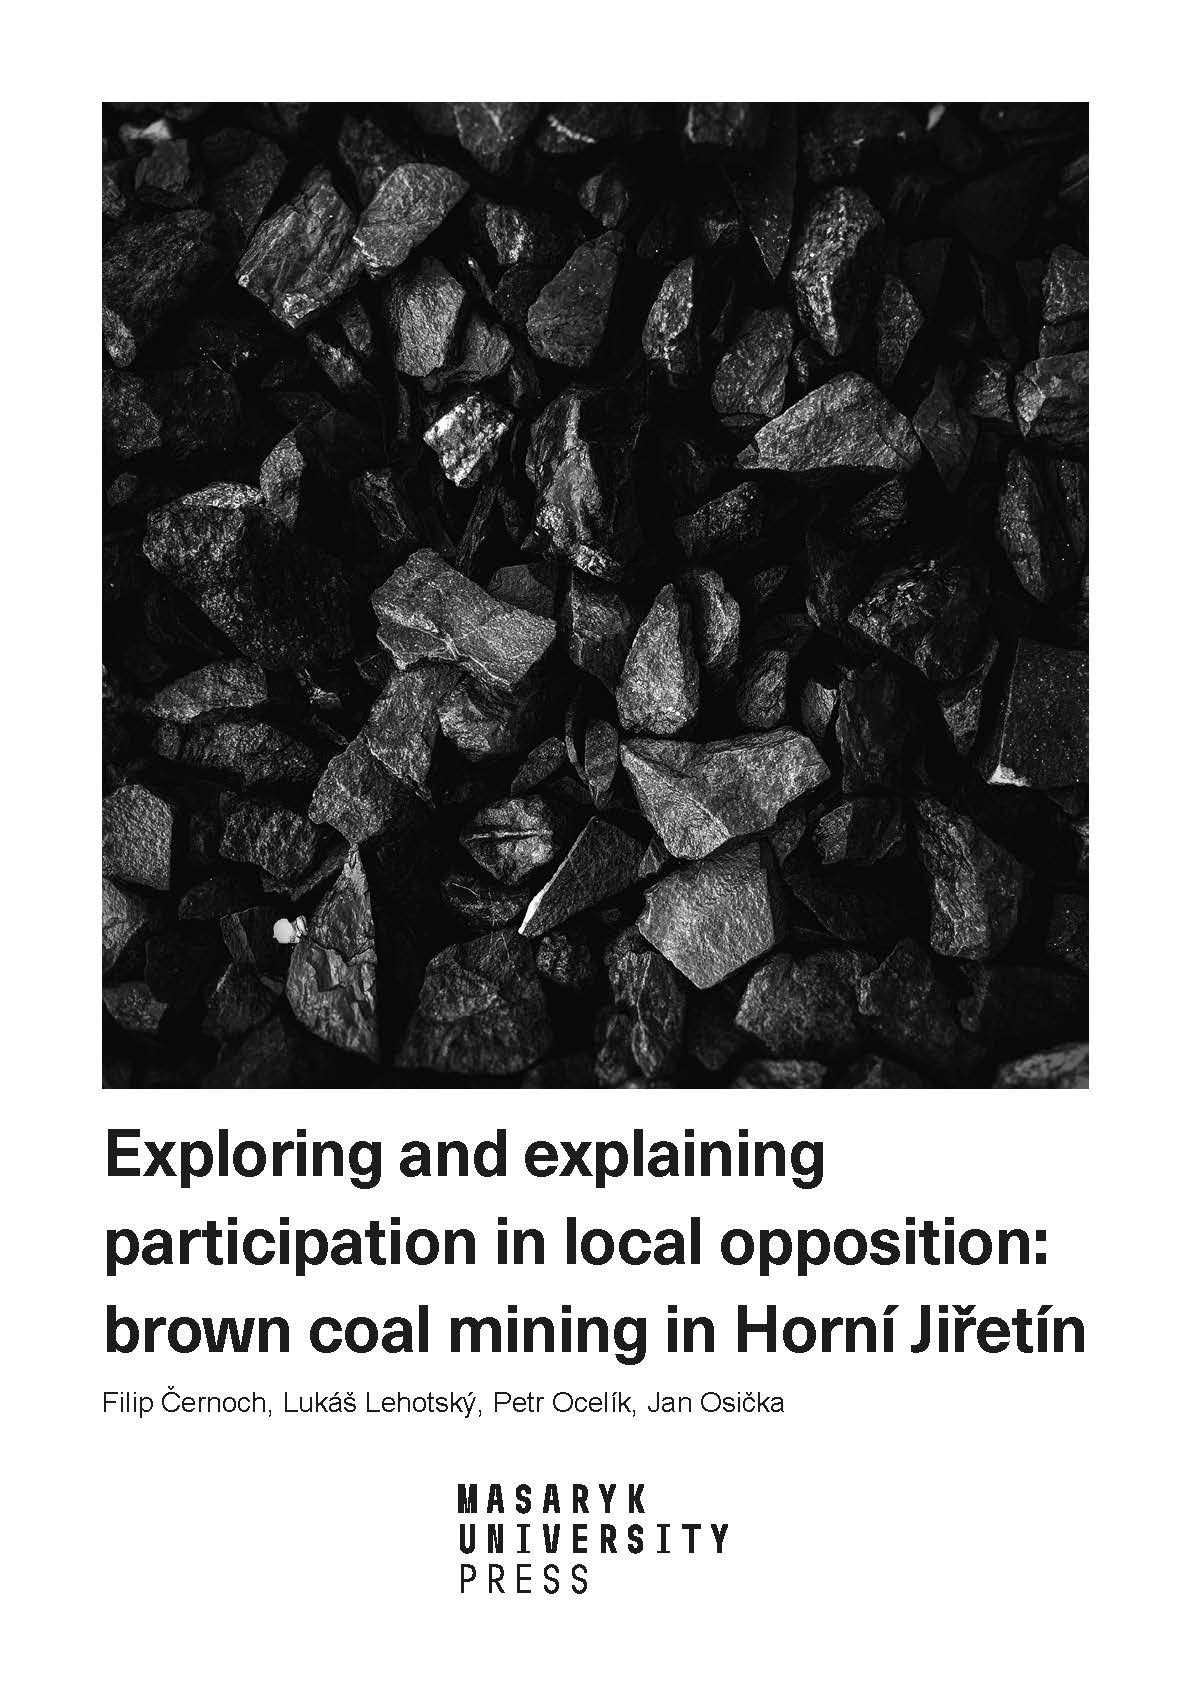 Obálka pro Exploring and explaining participation in local opposition: brown coal mining in Horní Jiřetín